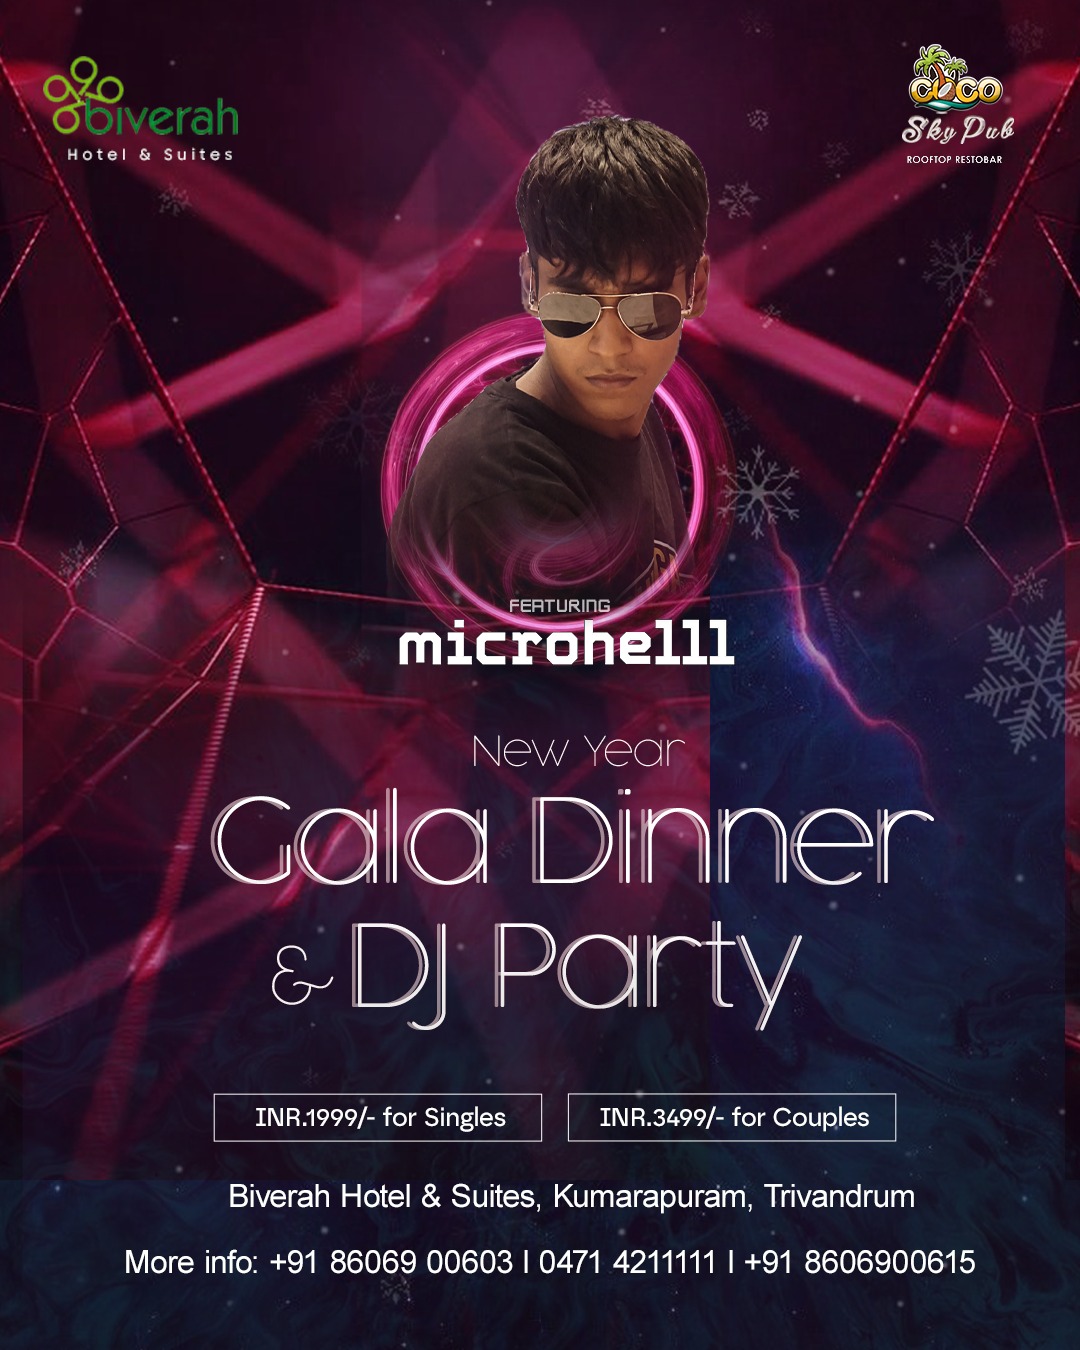 DJ and Gala dinner at Biverah hotel and sites